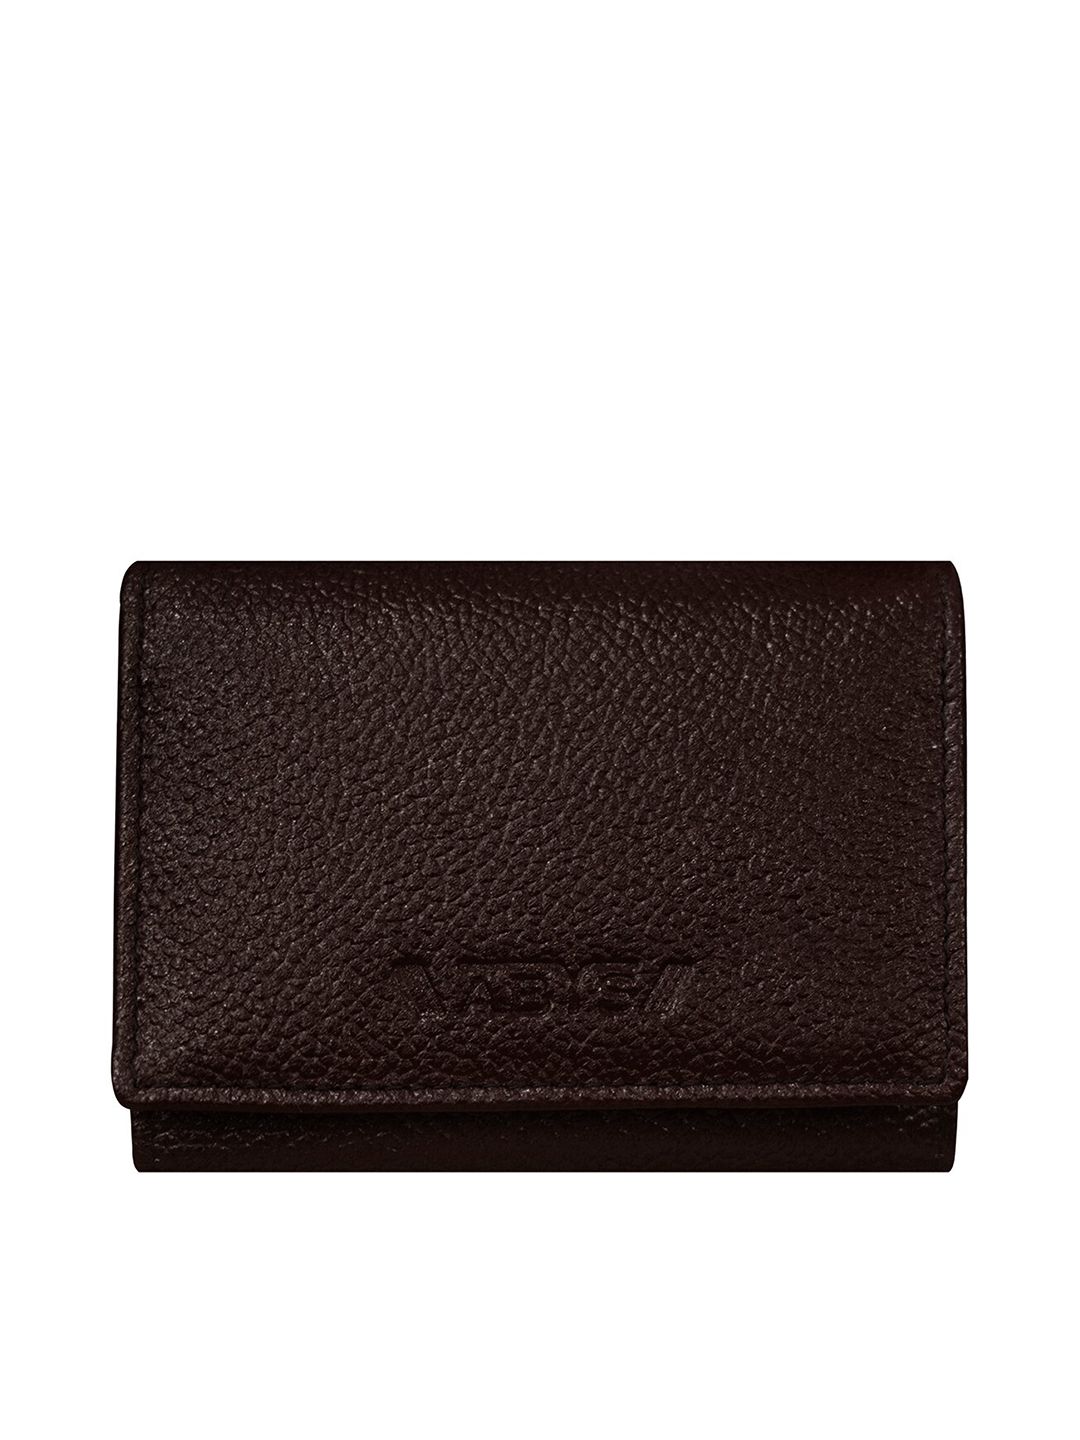 ABYS Unisex Coffee Brown Textured Leather Two Fold Wallet Price in India